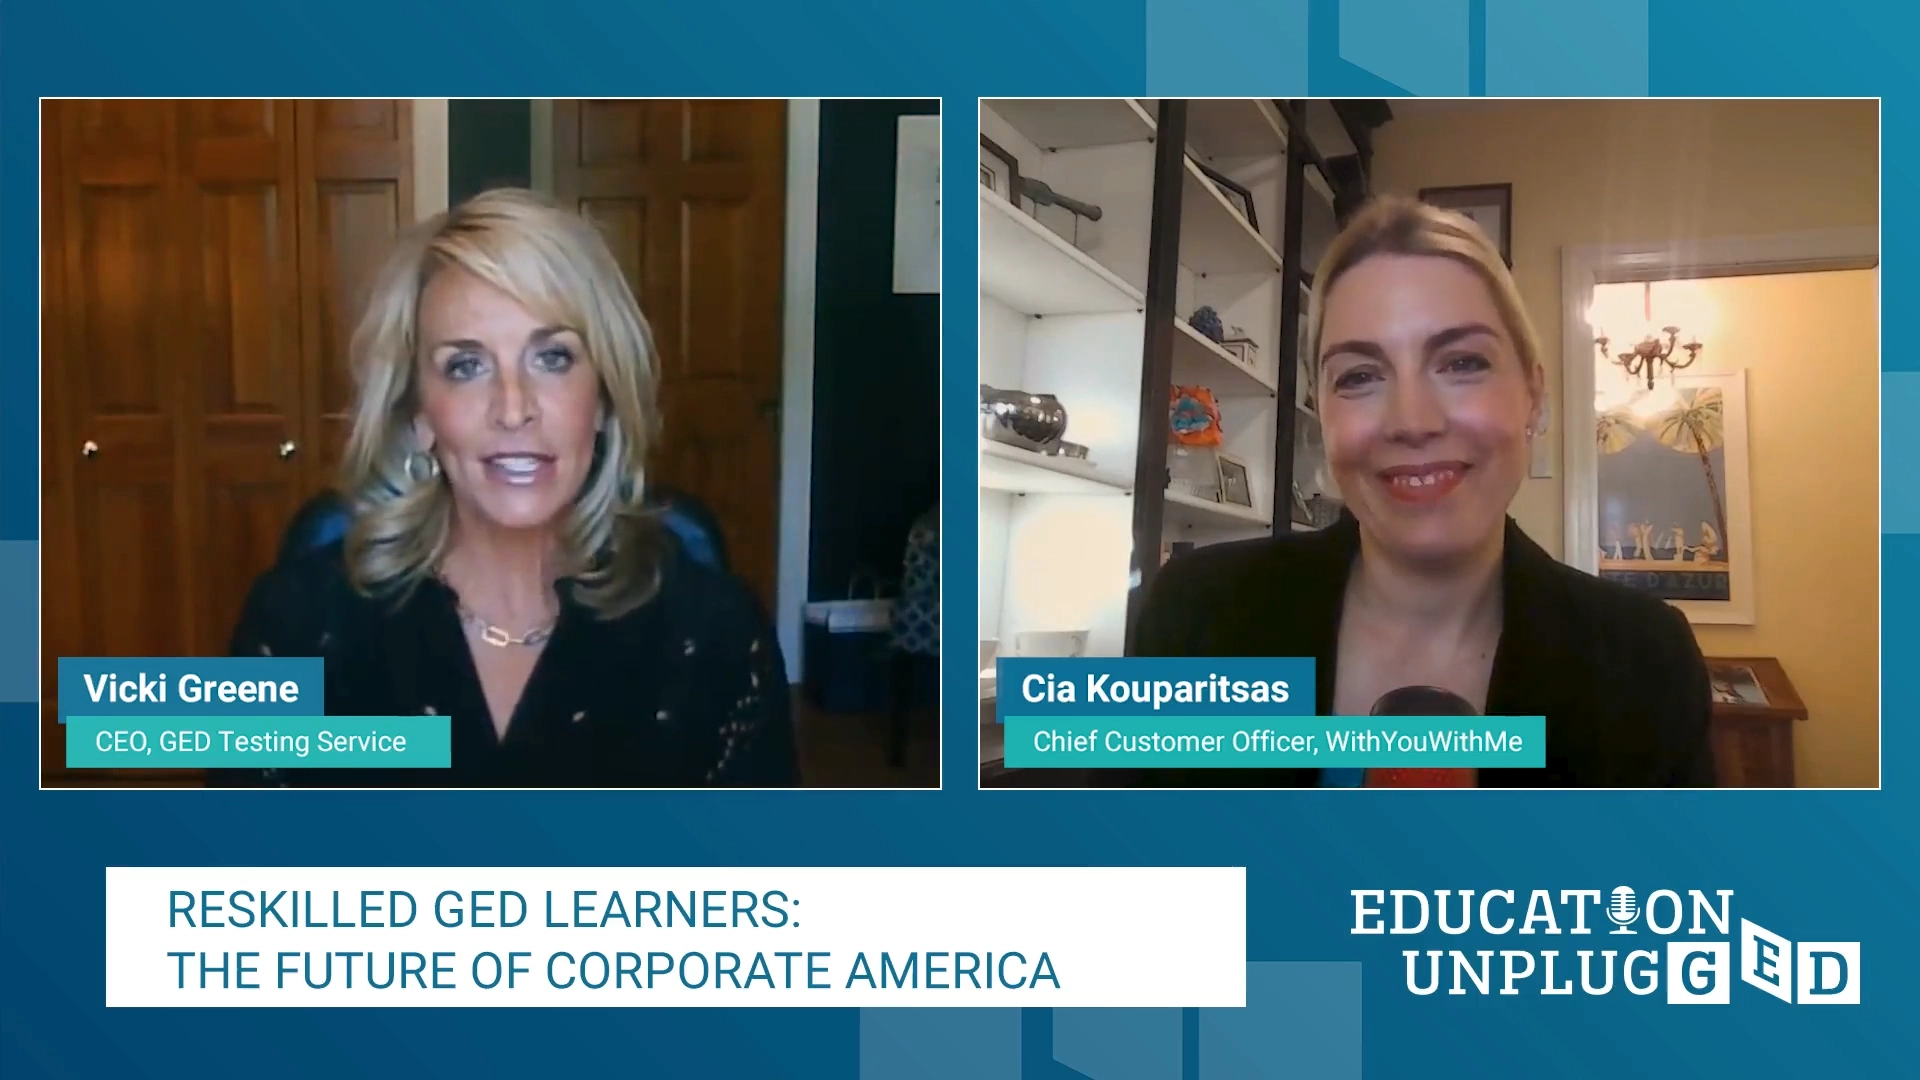 Re-Skilled GED Learners: The Future of Corporate America